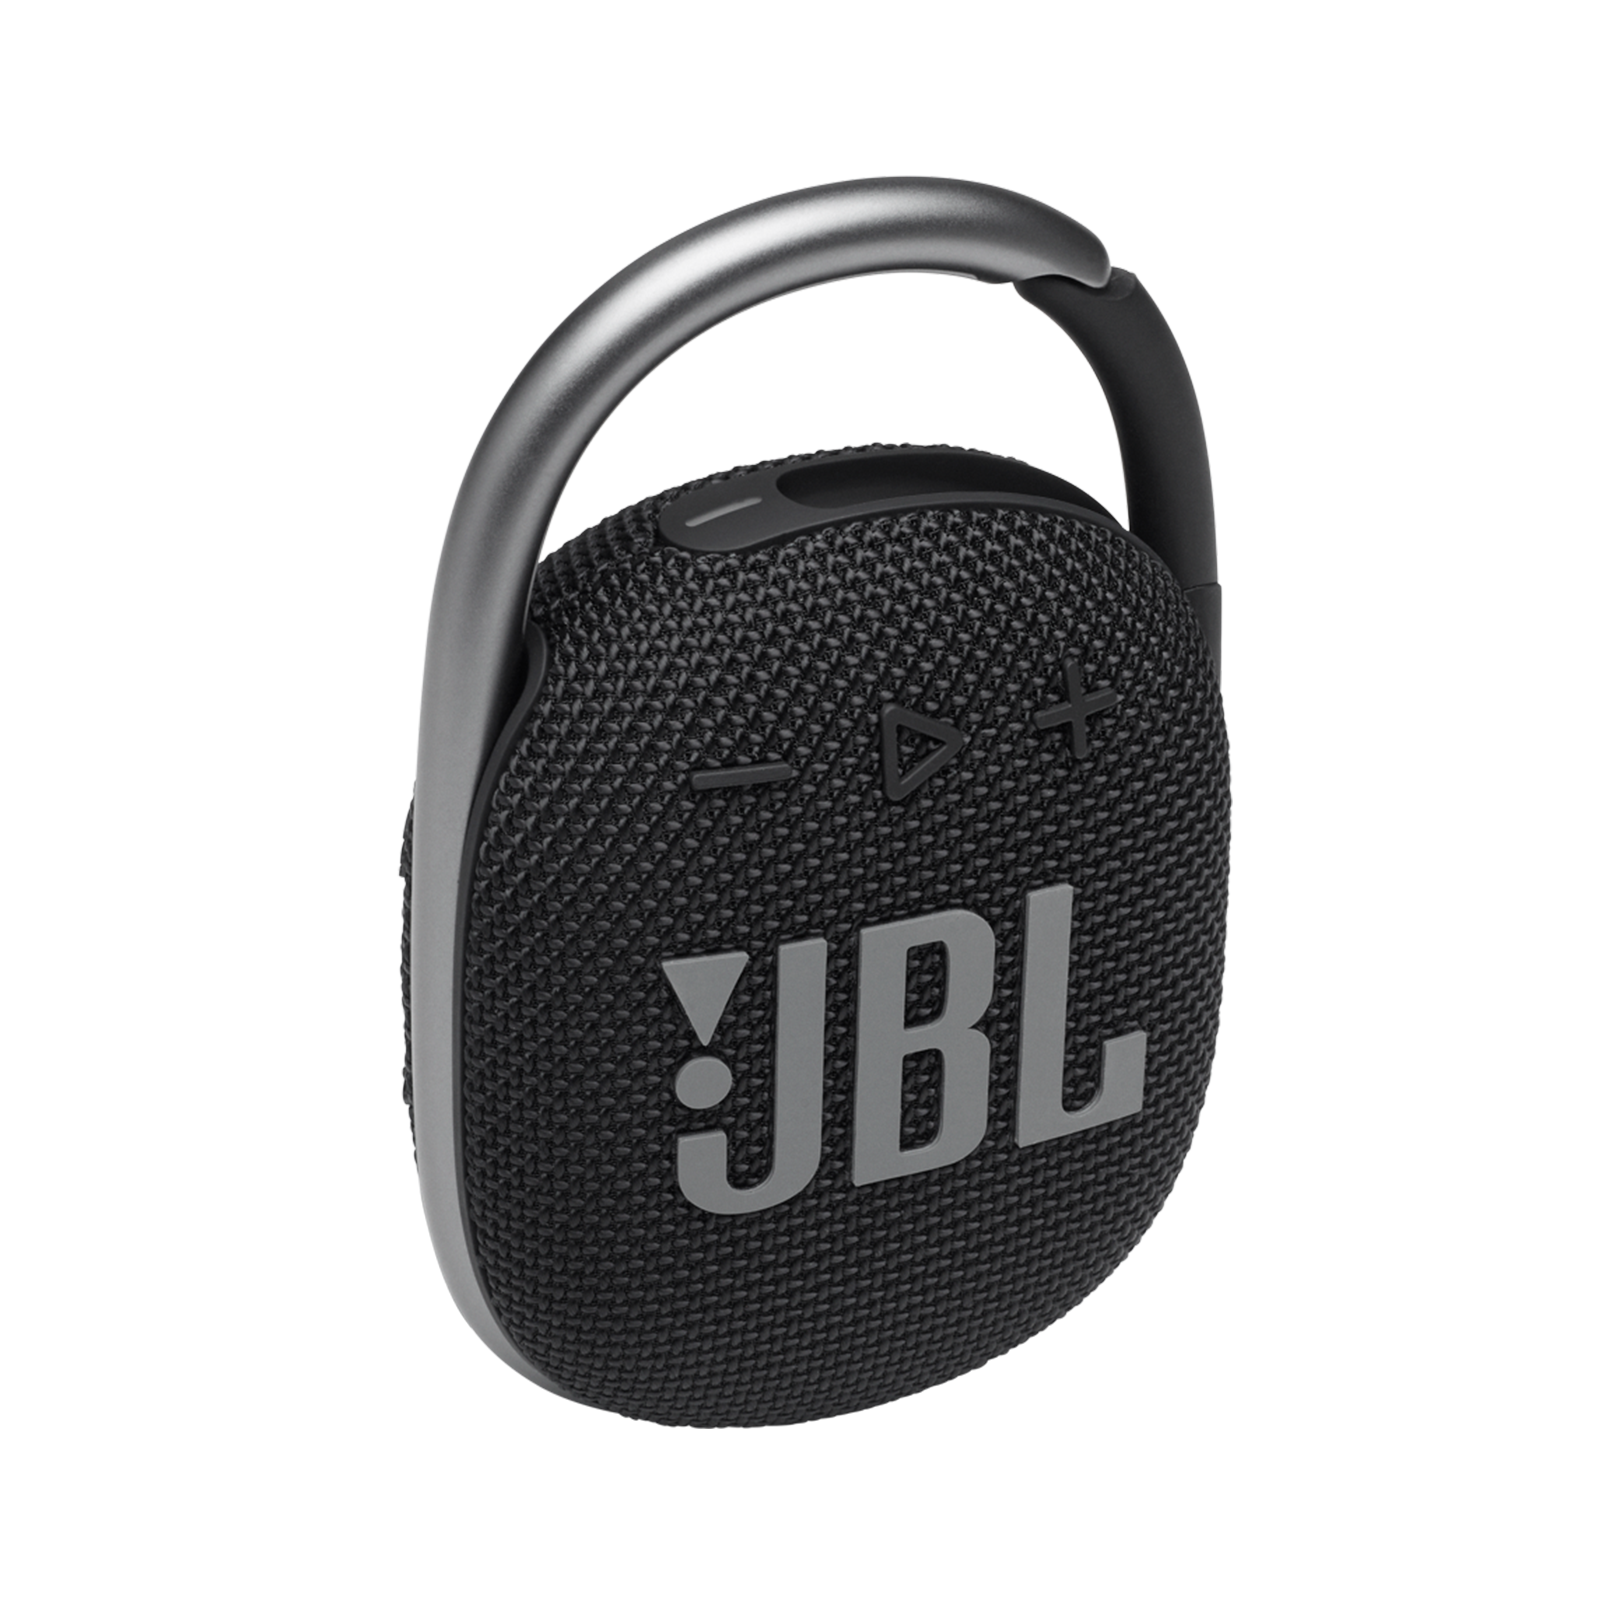 Got the JBL Go 2 And the JBL Clip 4 now i got 7 JBL's i got the JBL Go 2, JBL  Clip 4, JBL Flip 4, JBL Charge 4, JBL Extreme